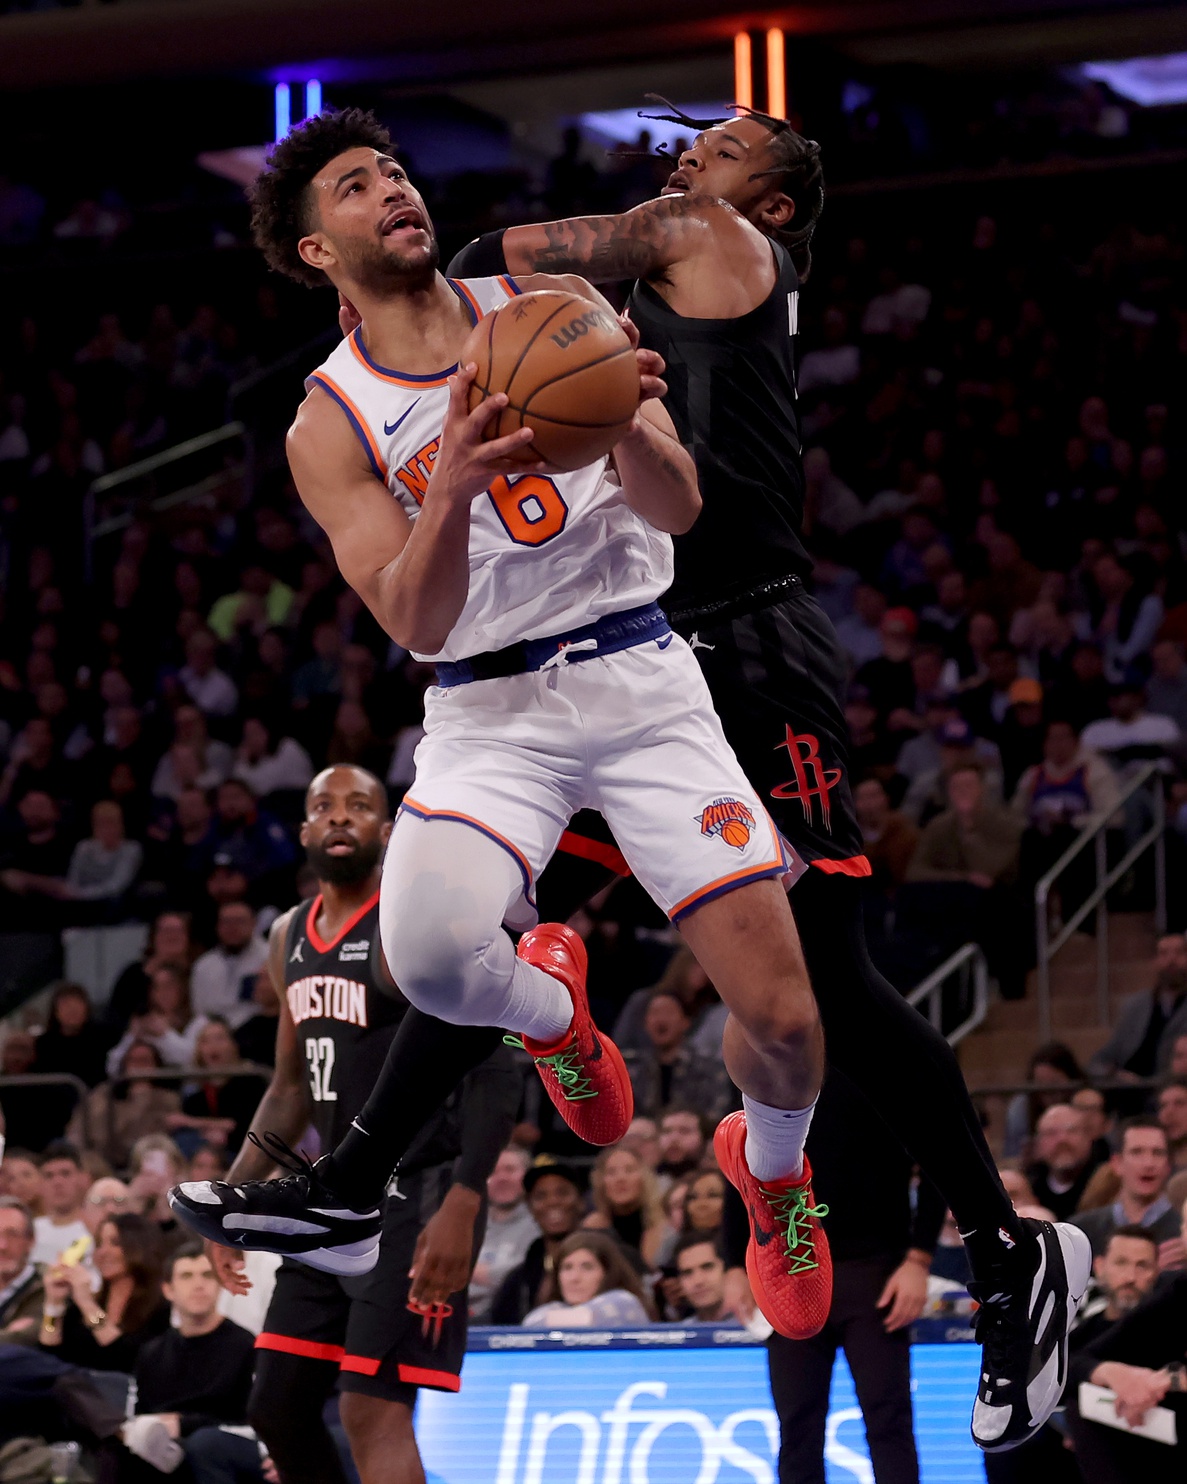 New York Knicks guard Quentin Grimes (6) is fouled by Houston Rockets forward Cam Whitmore (7) as he drives to the basket during the second quarter at Madison Square Garden.